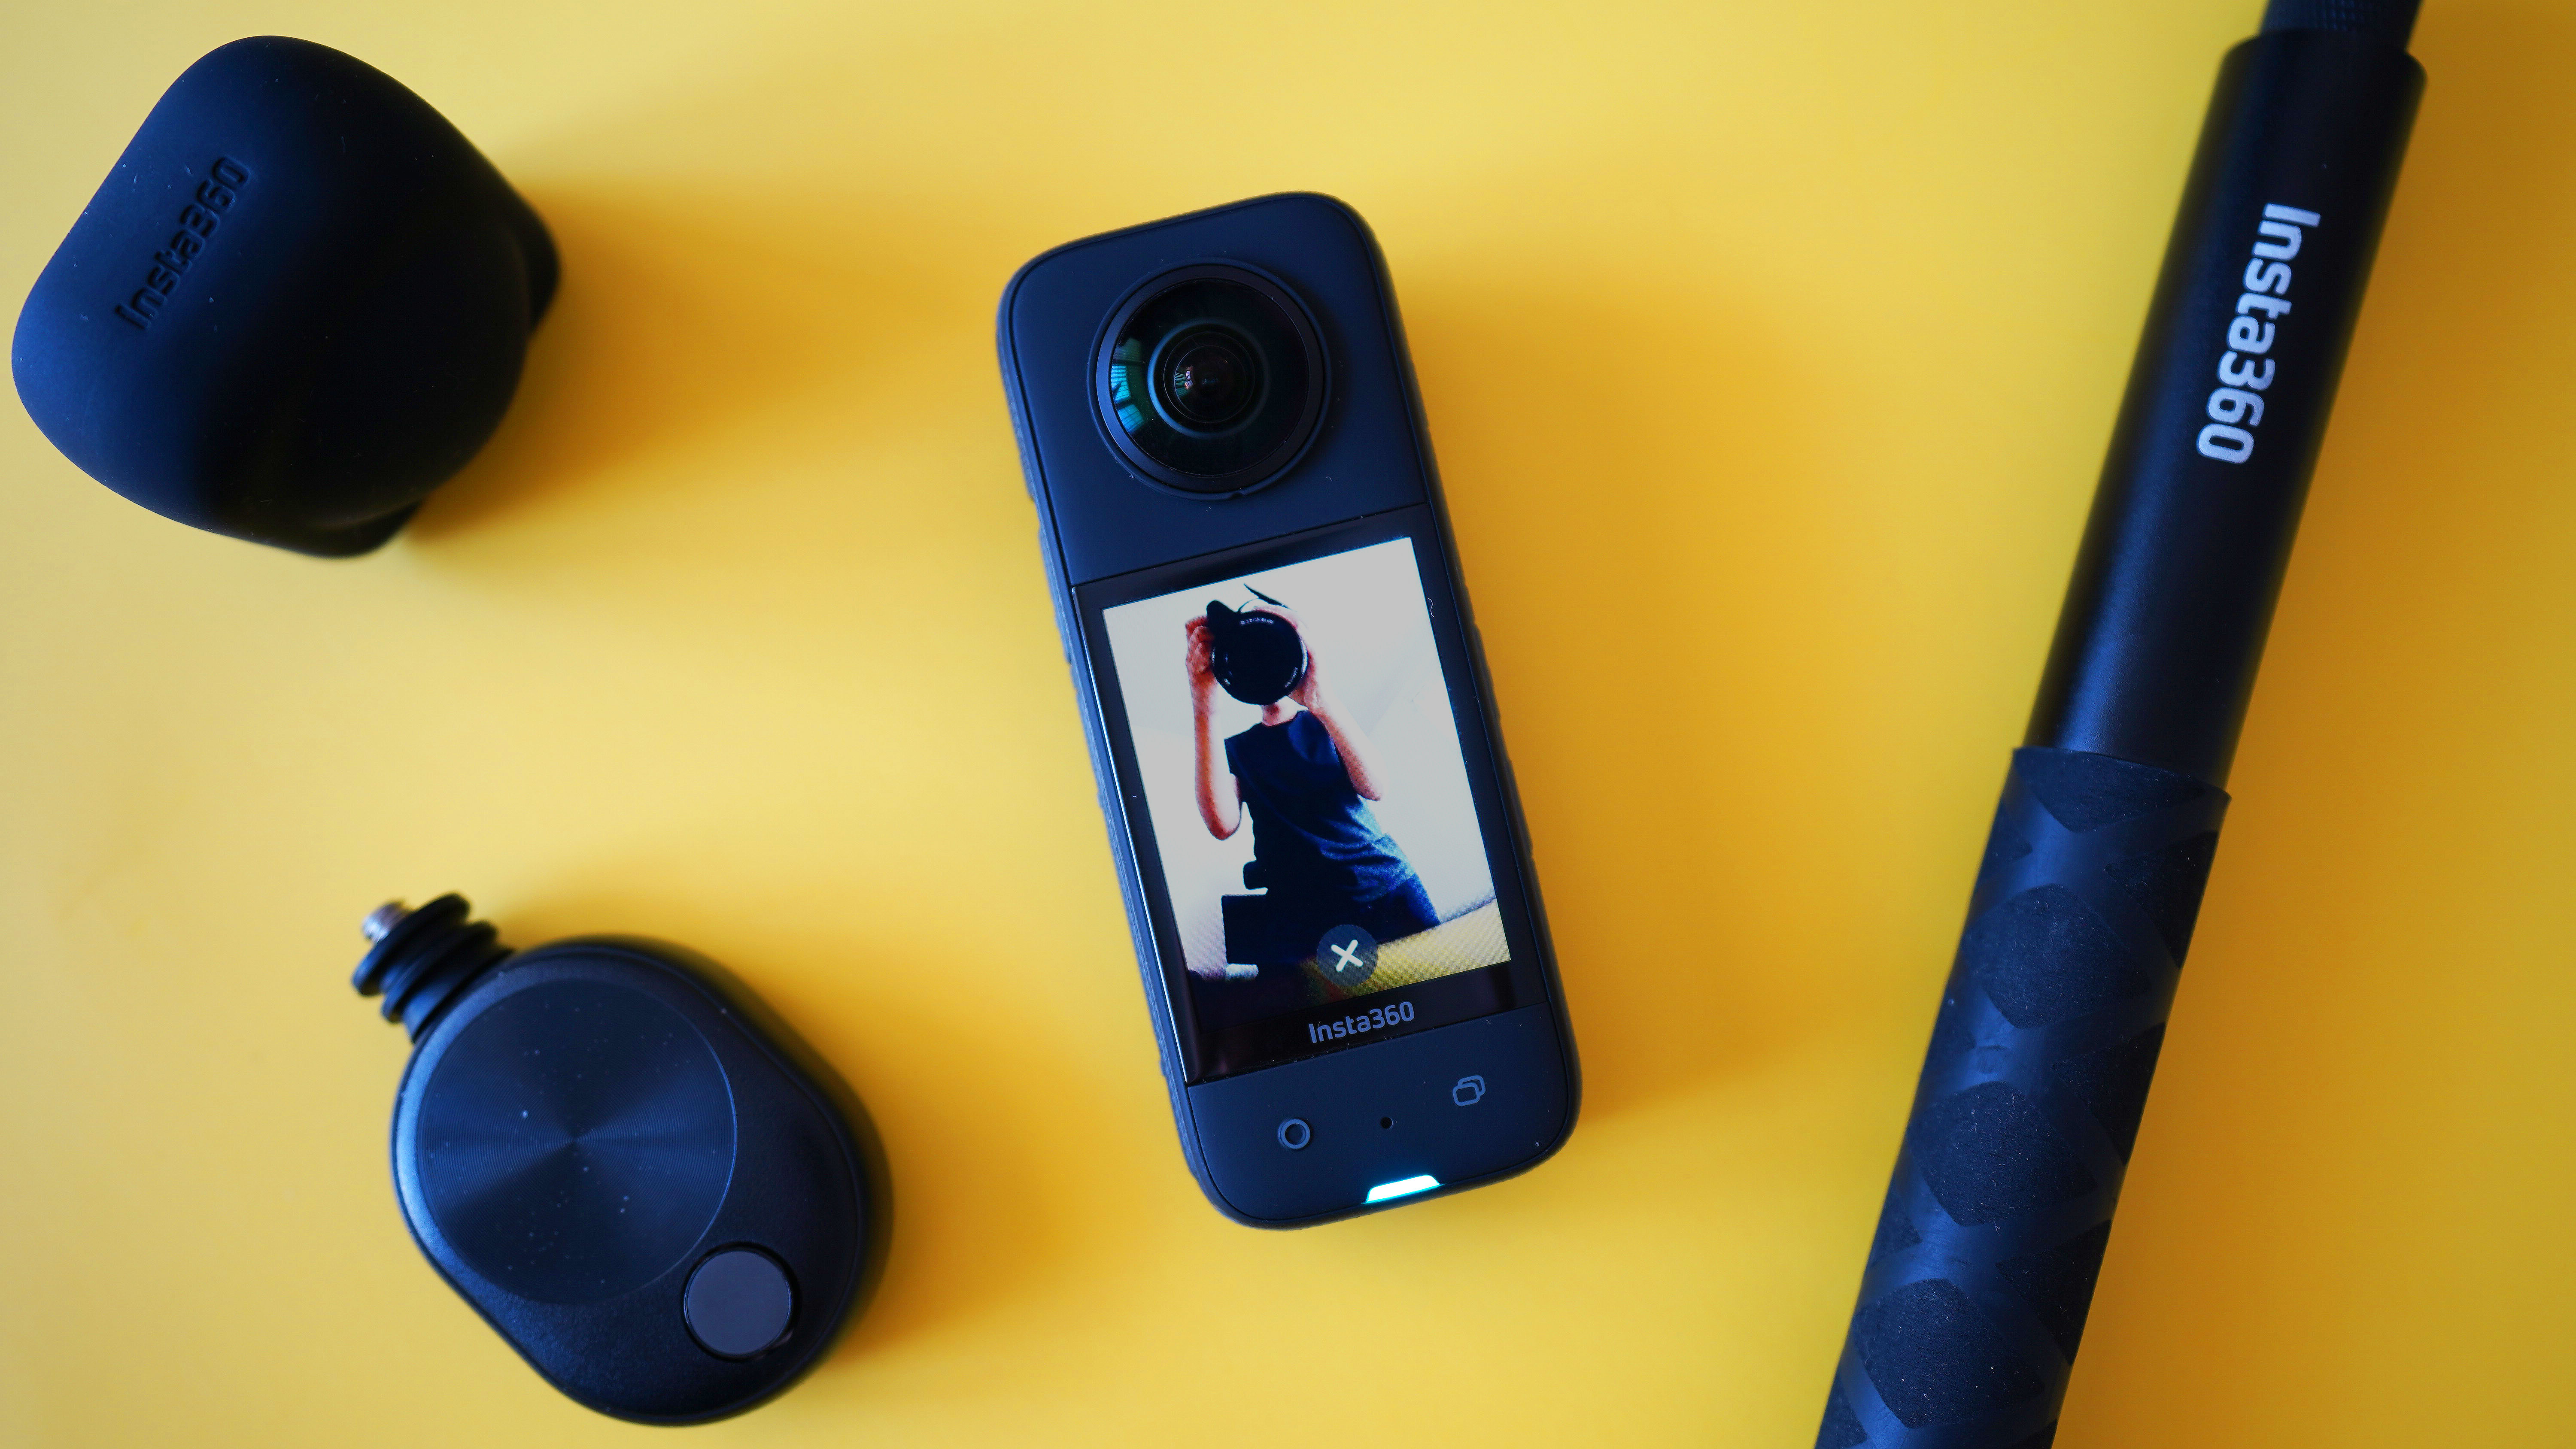 Insta360 One X2 adds a touchscreen to a 5.7k 360 camera - The Verge